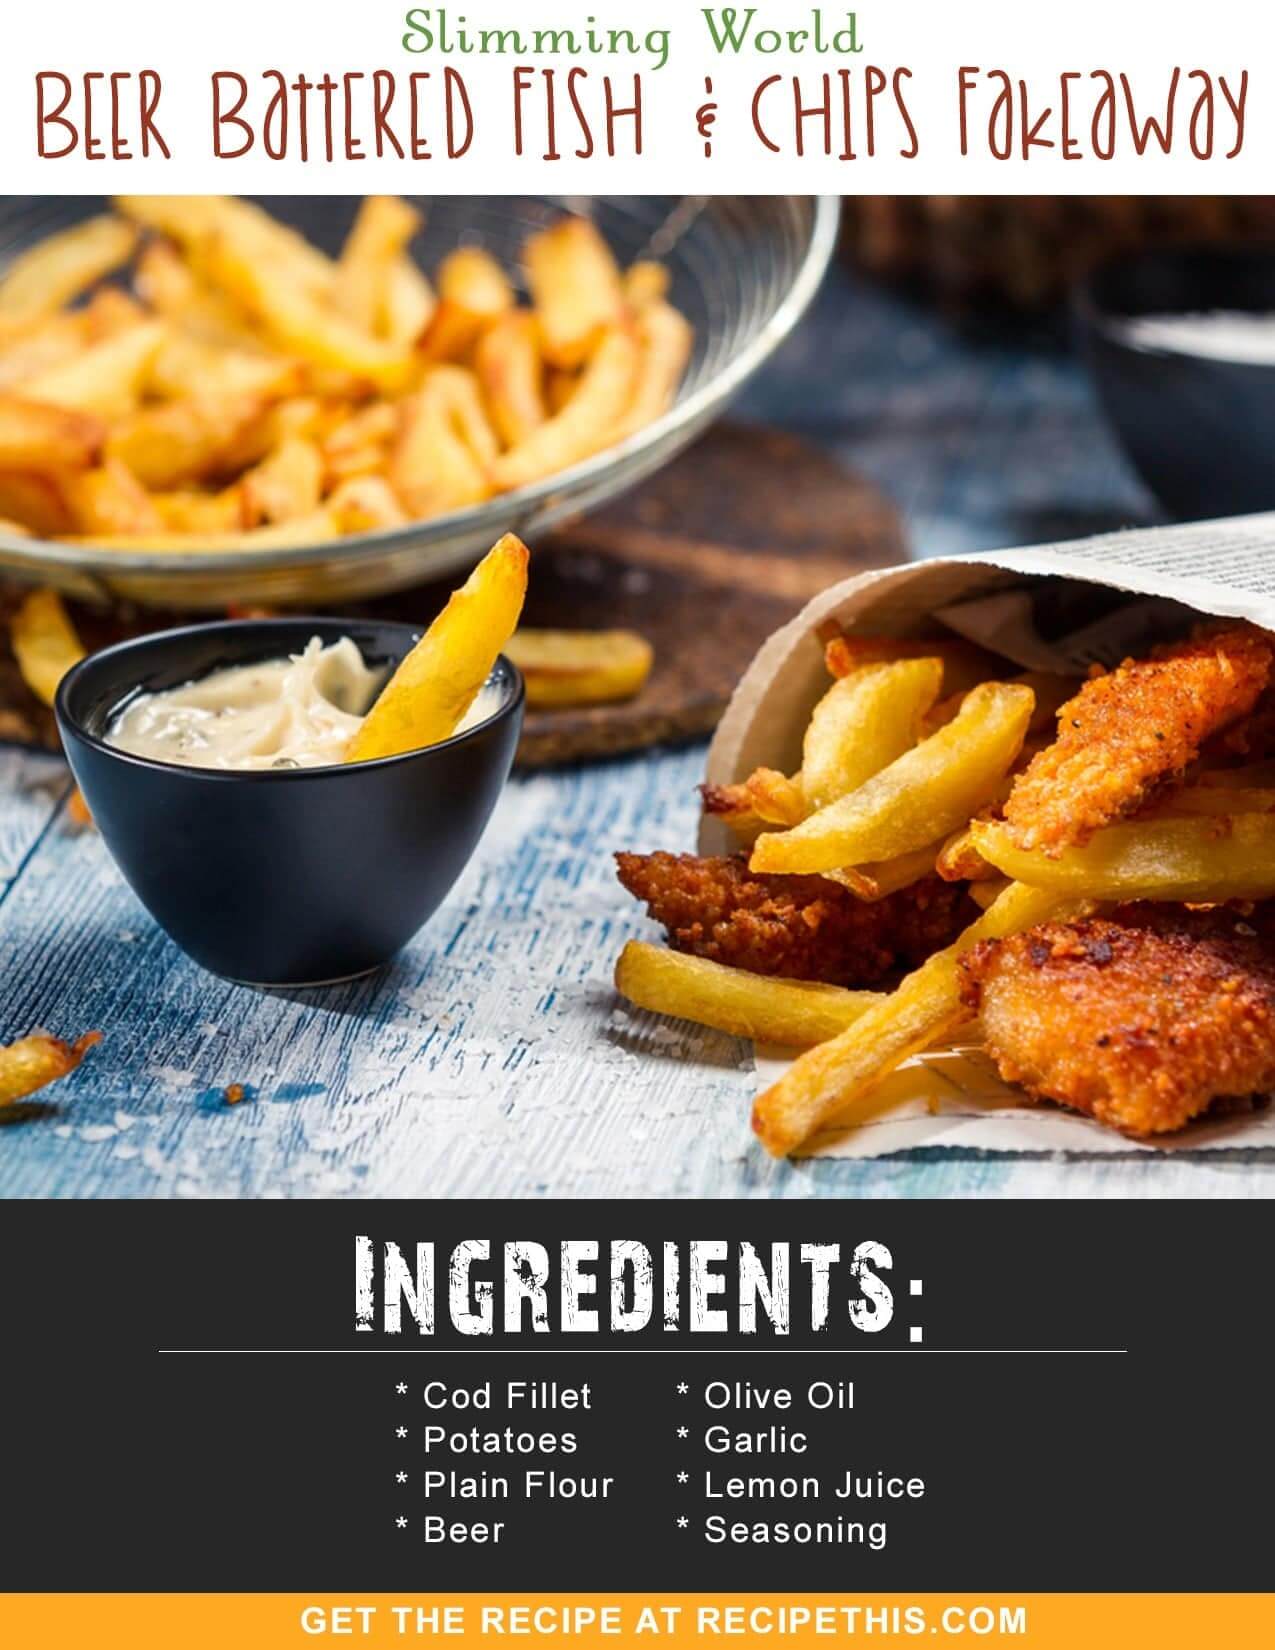 Slimming World Recipes | Slimming World Beer Battered Fish & Chips Fakeaway Recipe from RecipeThis.com